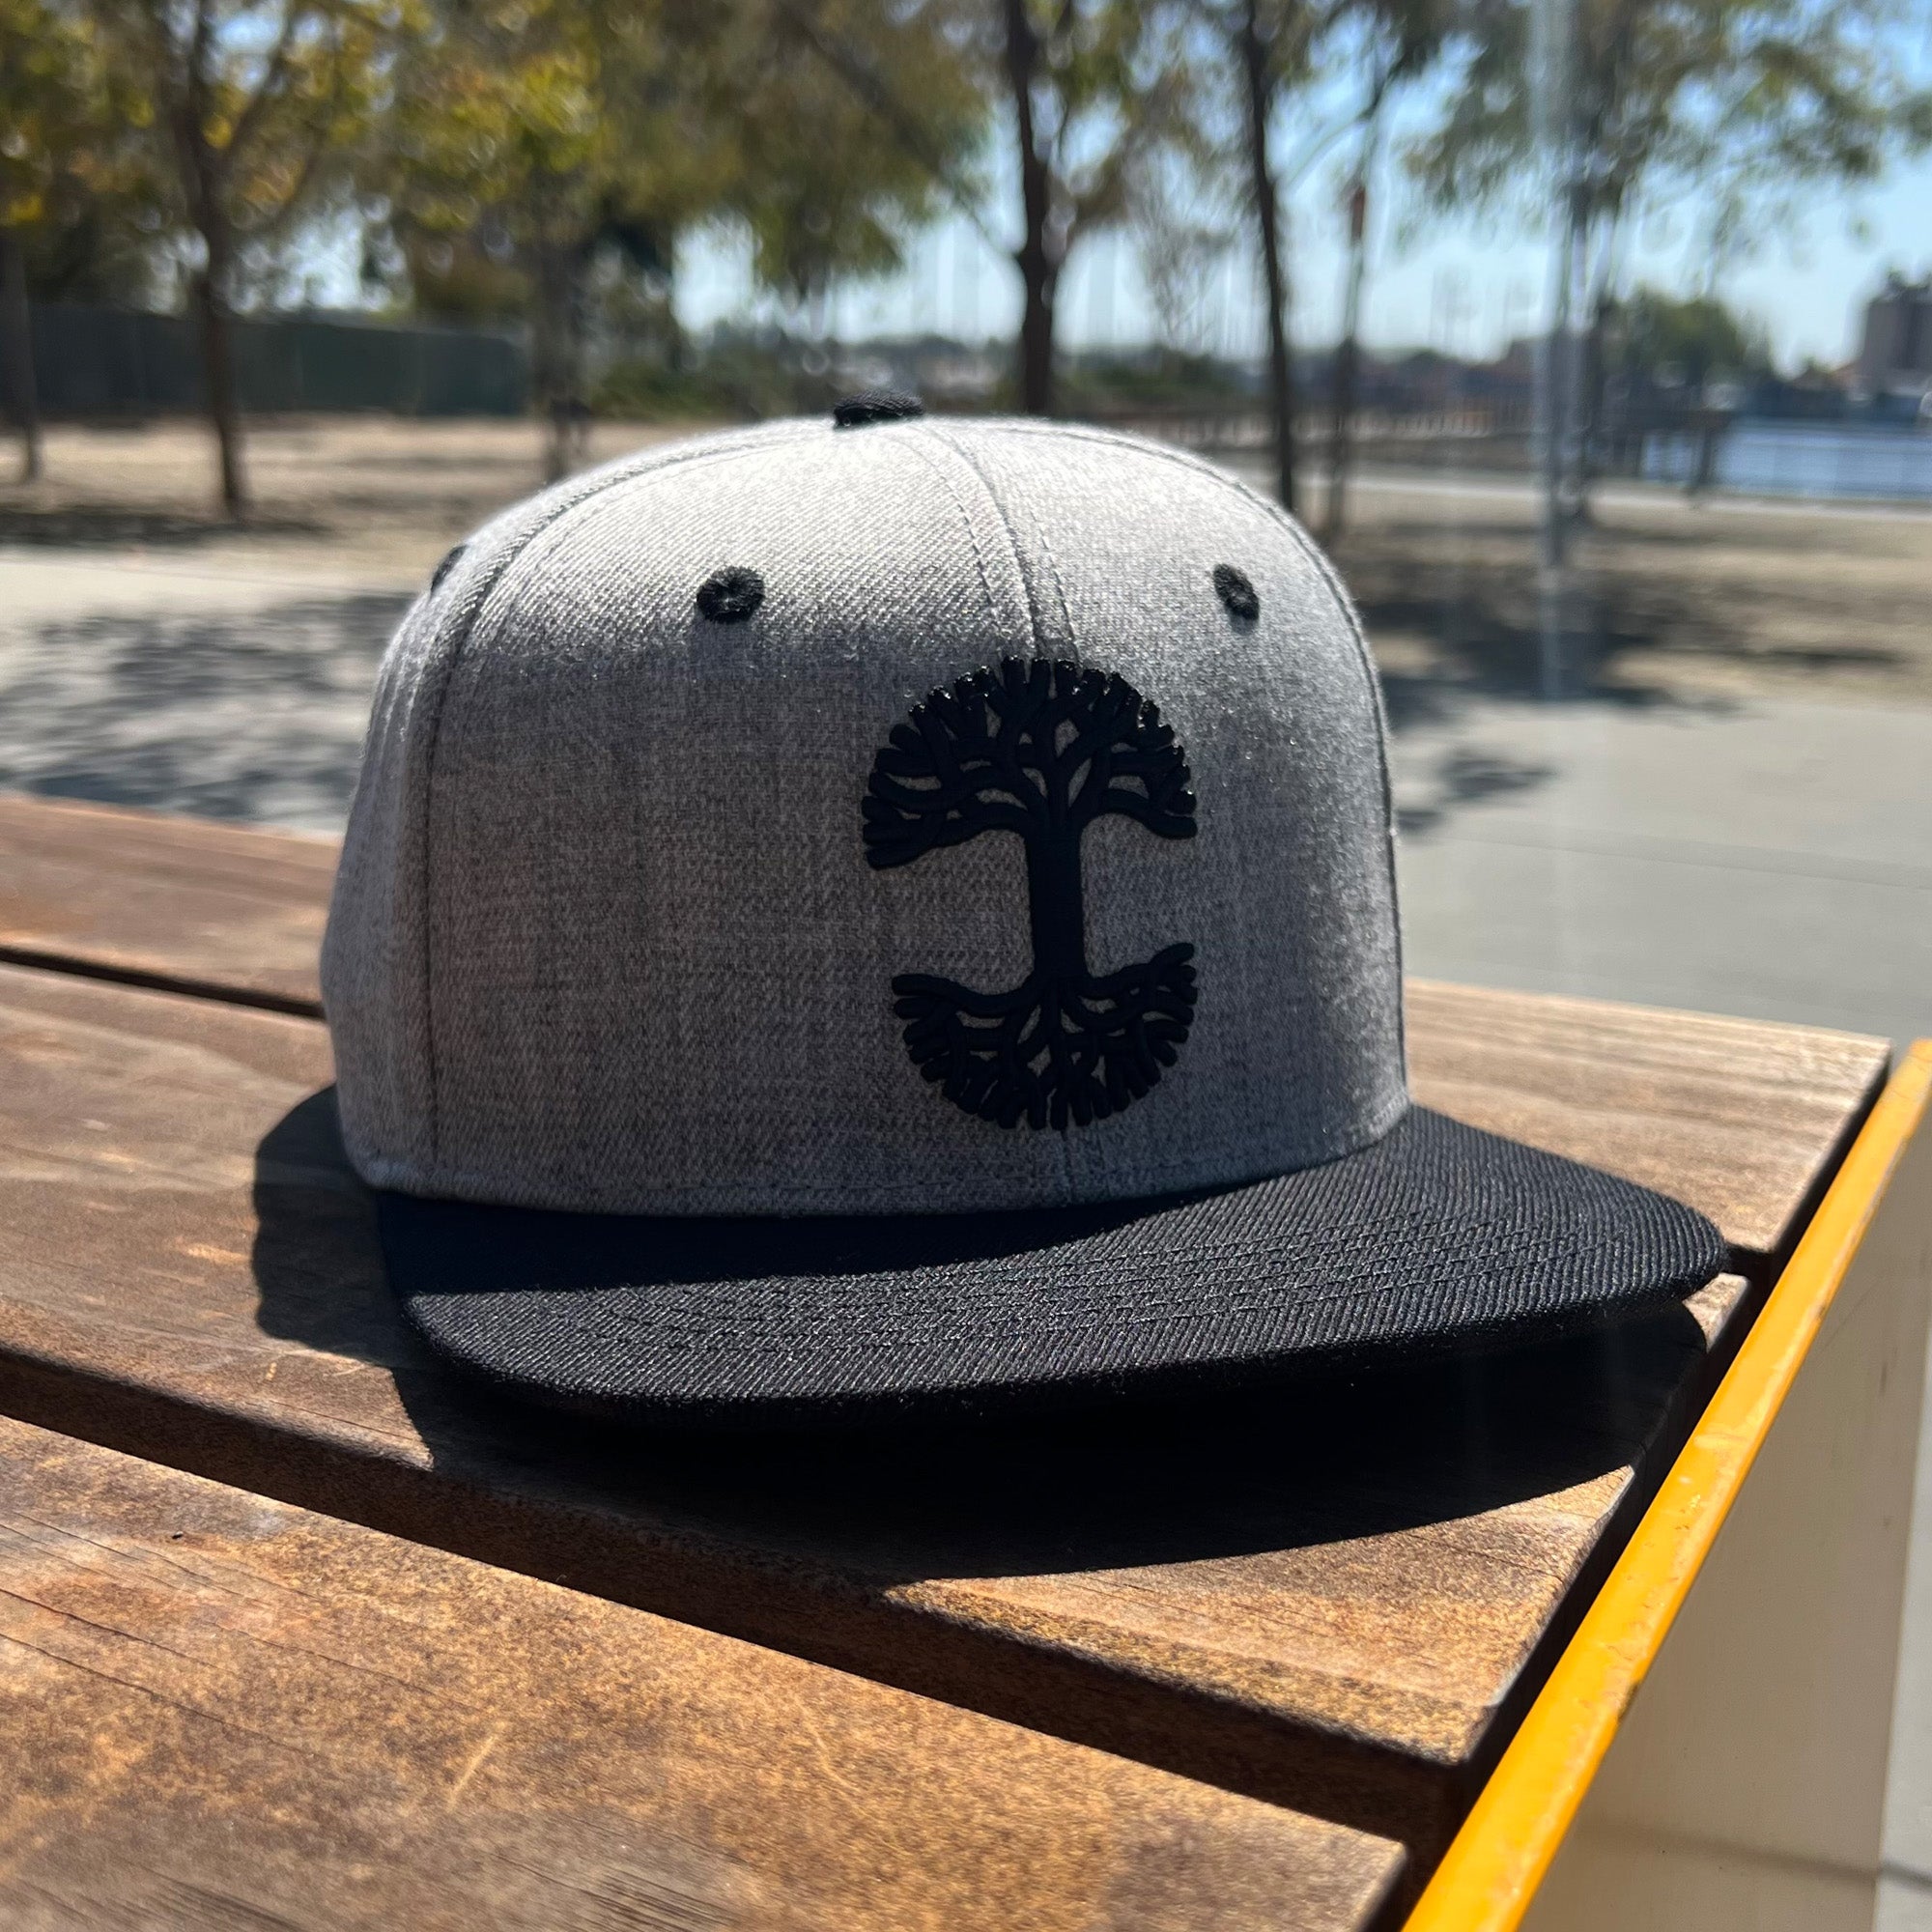 Photo image of Grey cap with black embroidered Oaklandish tree logo on the front outside in natural lighting on bench.